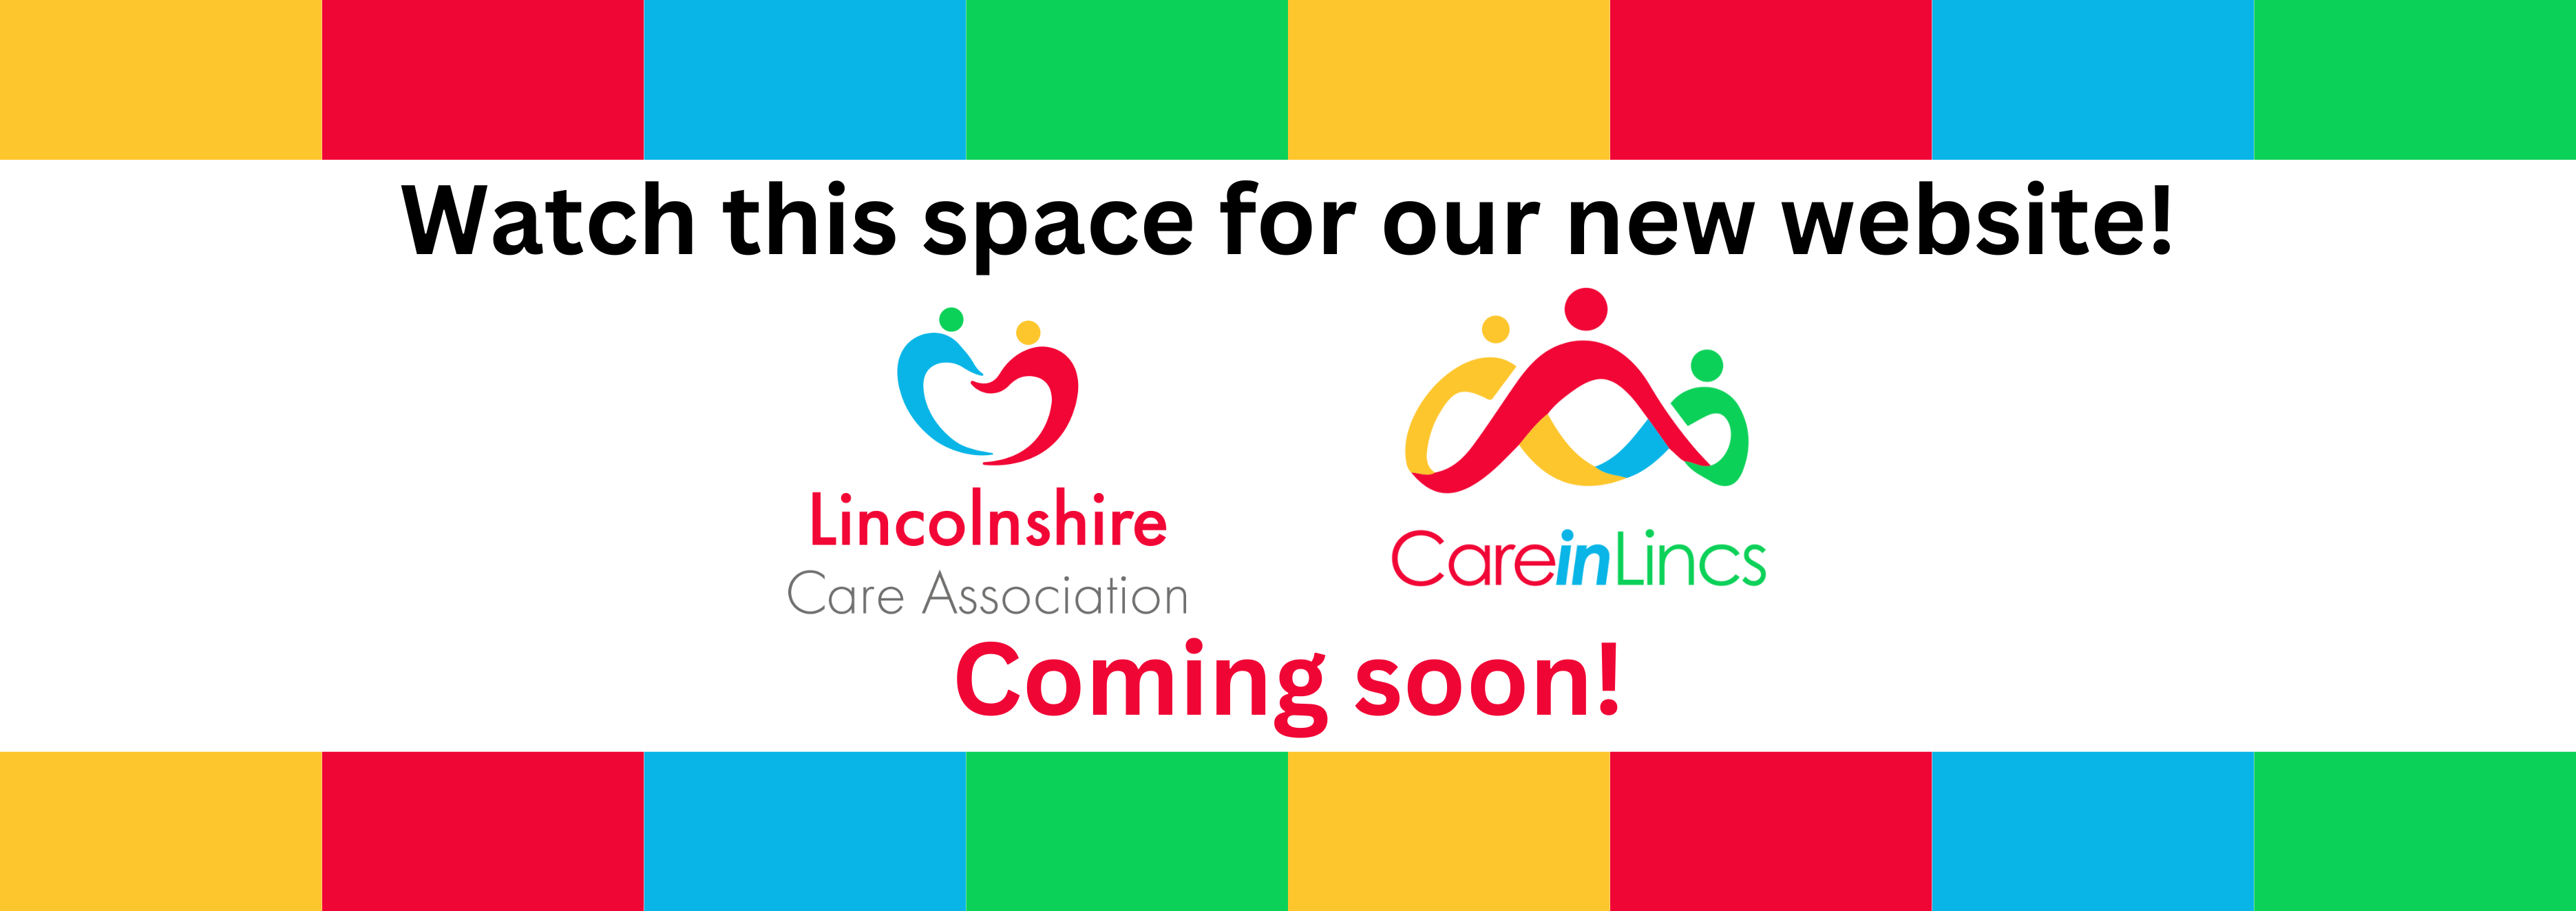 Watch this space for our new website